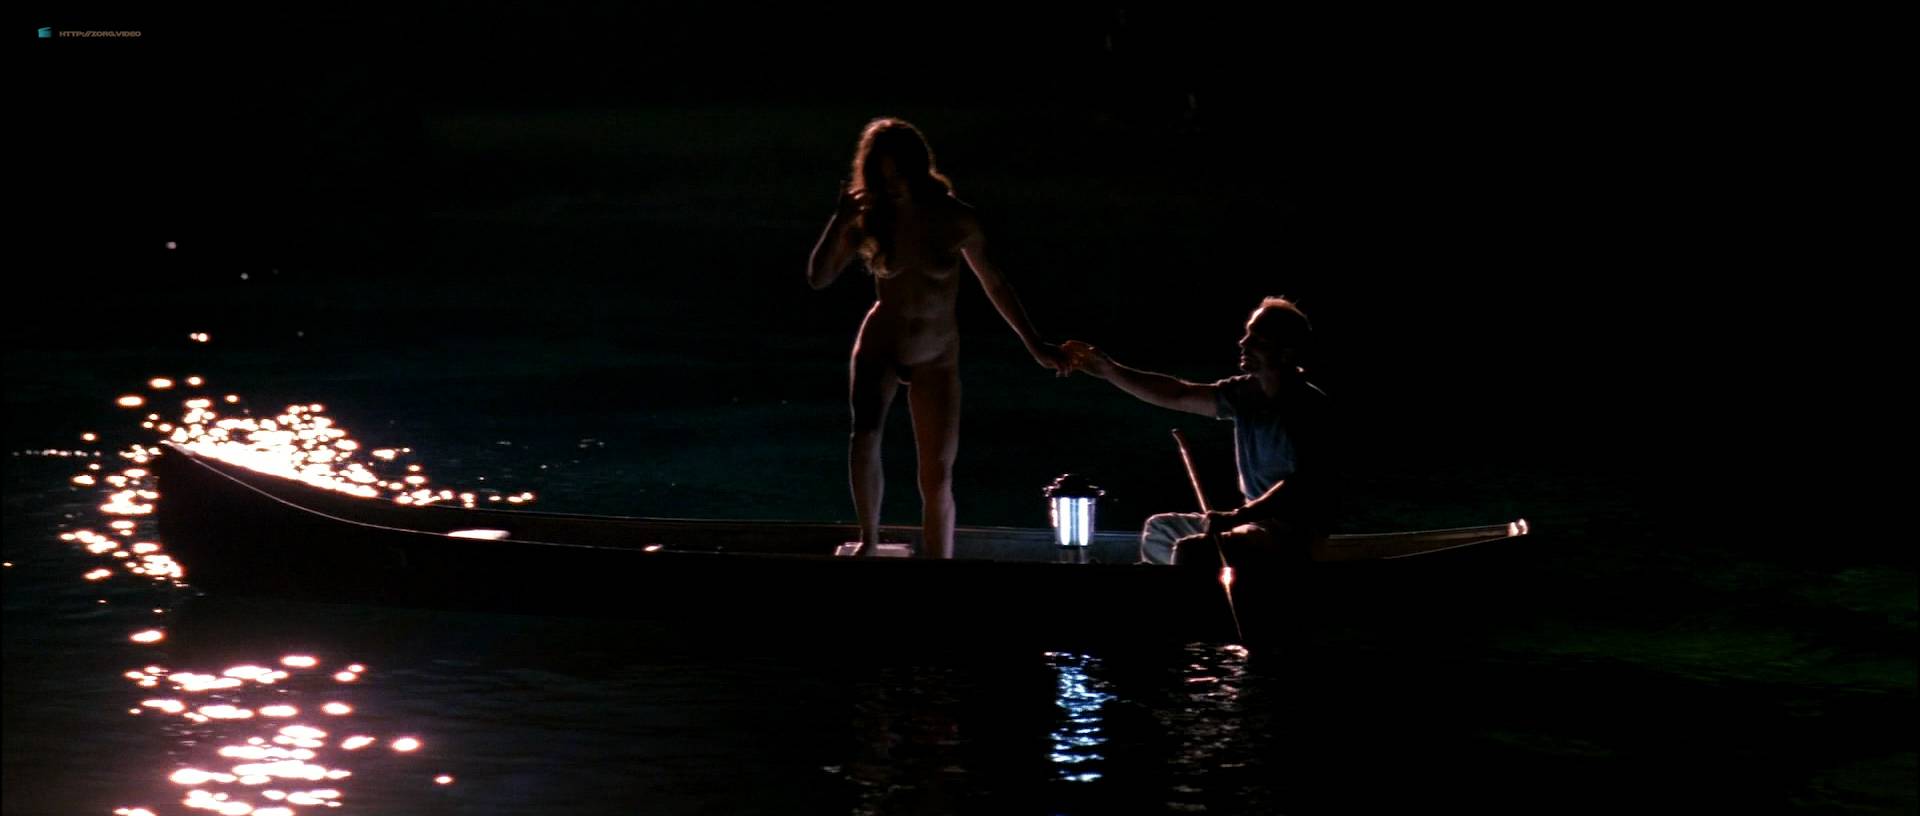 Madeleine Stowe Nude Full Frontal Skinny Dipping Patricia Healy Nude China Moon 1994 Hd